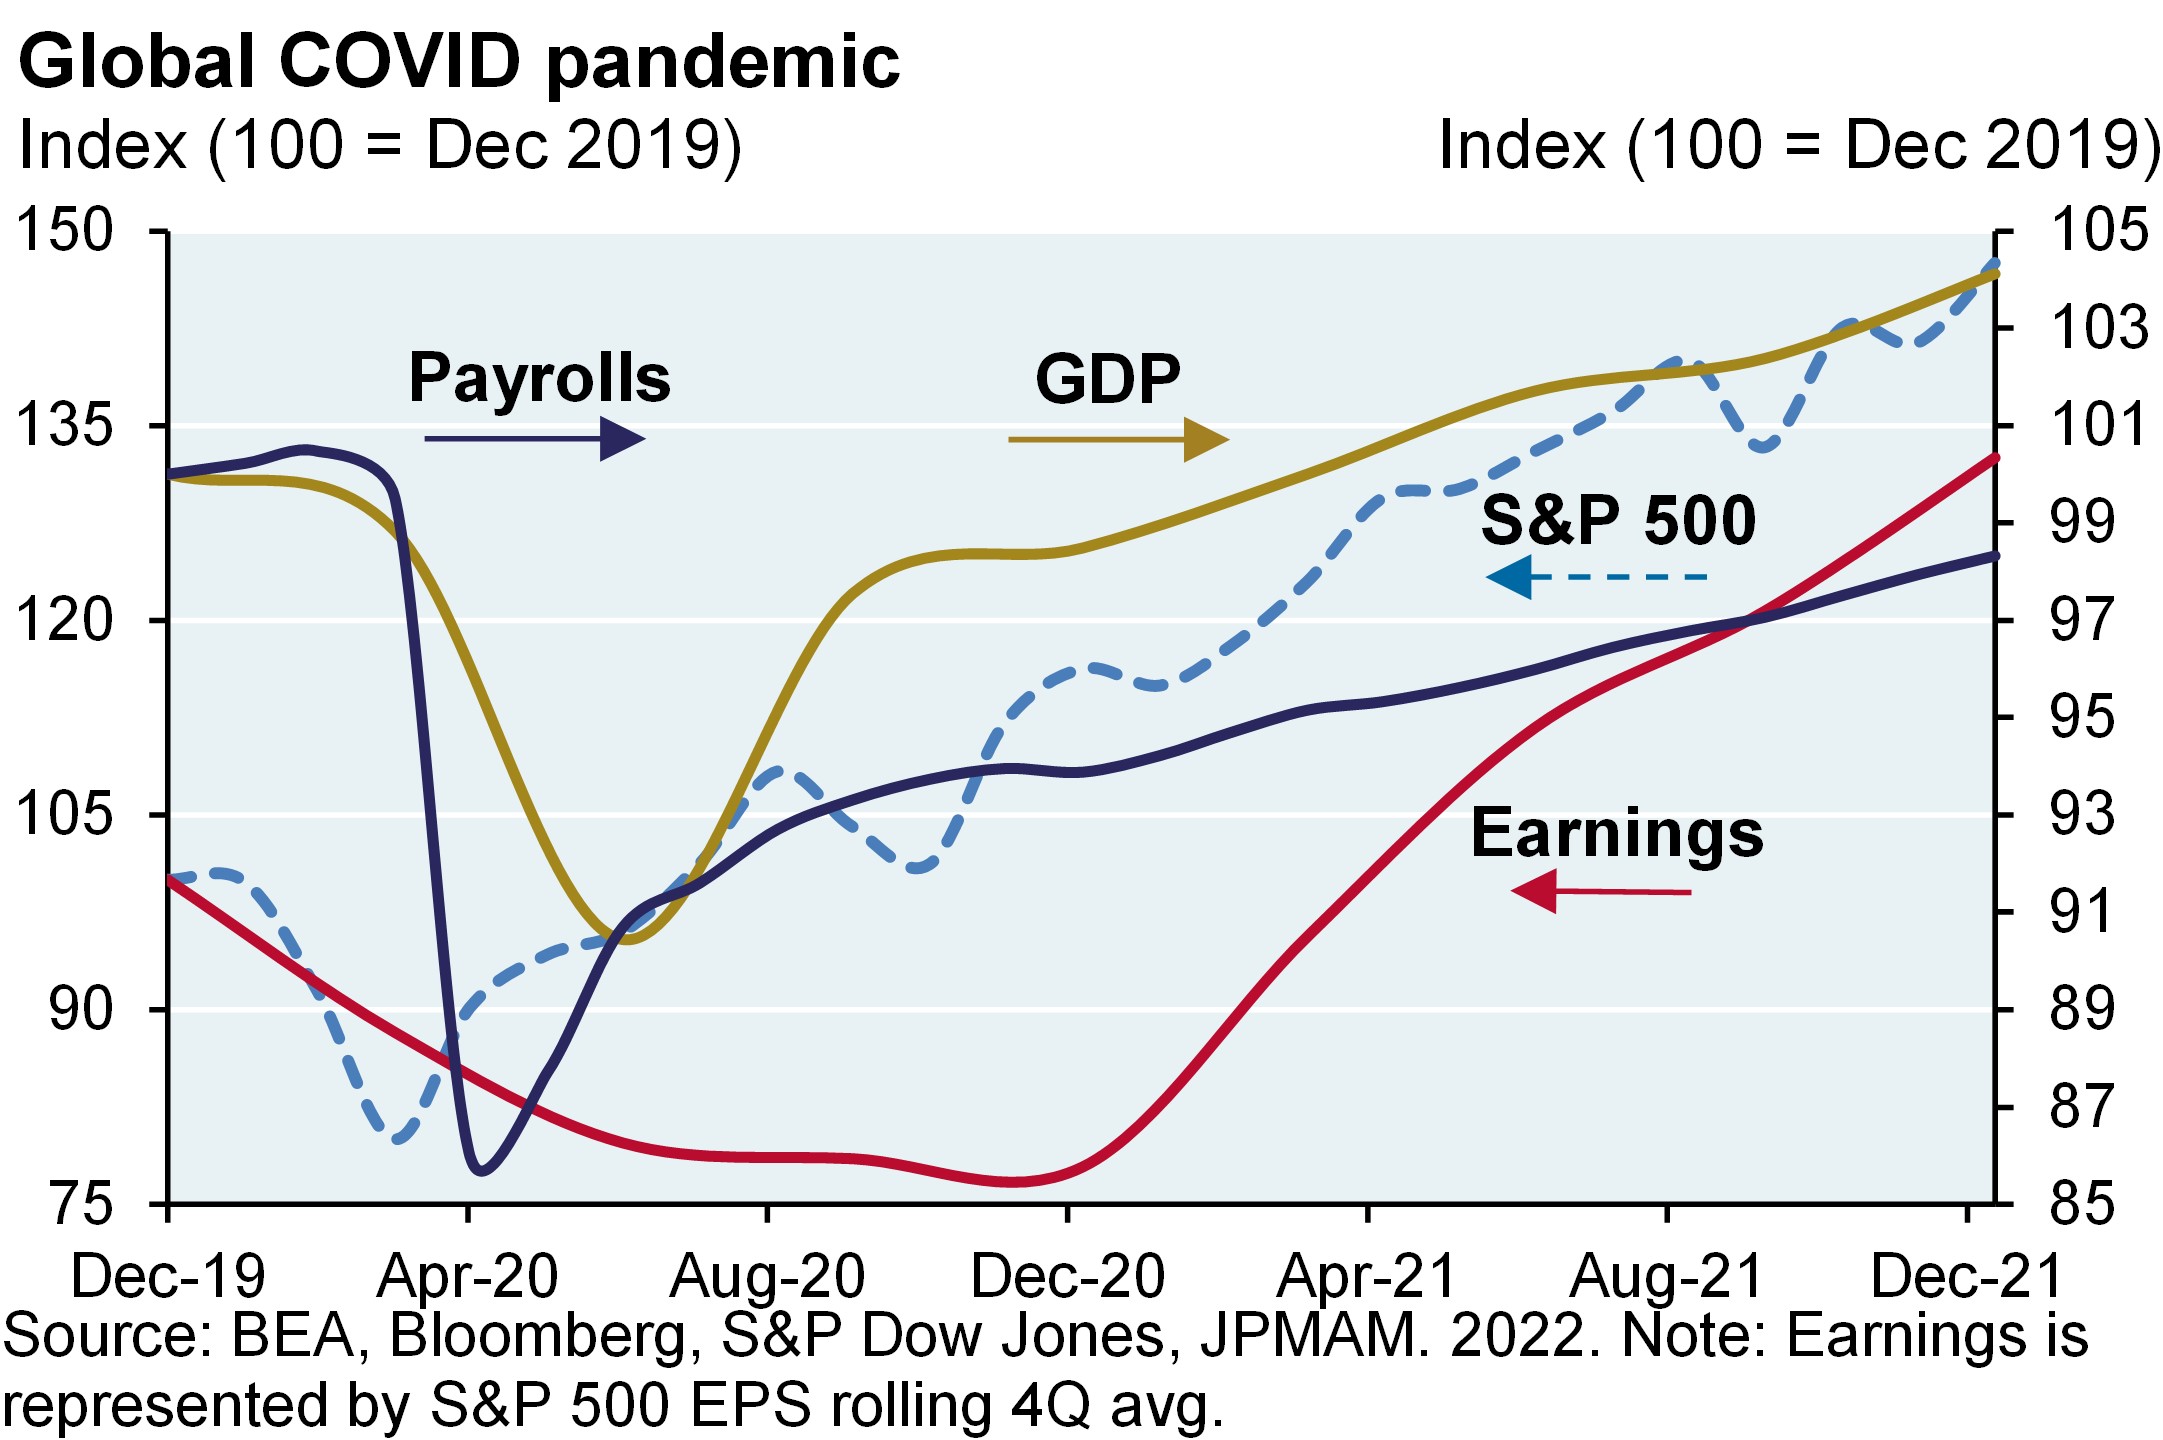 The indexed line chart compares the S&P 500, GDP, Earnings, and Nonfarm Payrolls throughout the Global COVID pandemic from December 2019 to December 2021. The S&P 500 bottomed in March 2020, followed by Payroll in April 2020, GDP in June 2020 and Earnings in December 2020. 